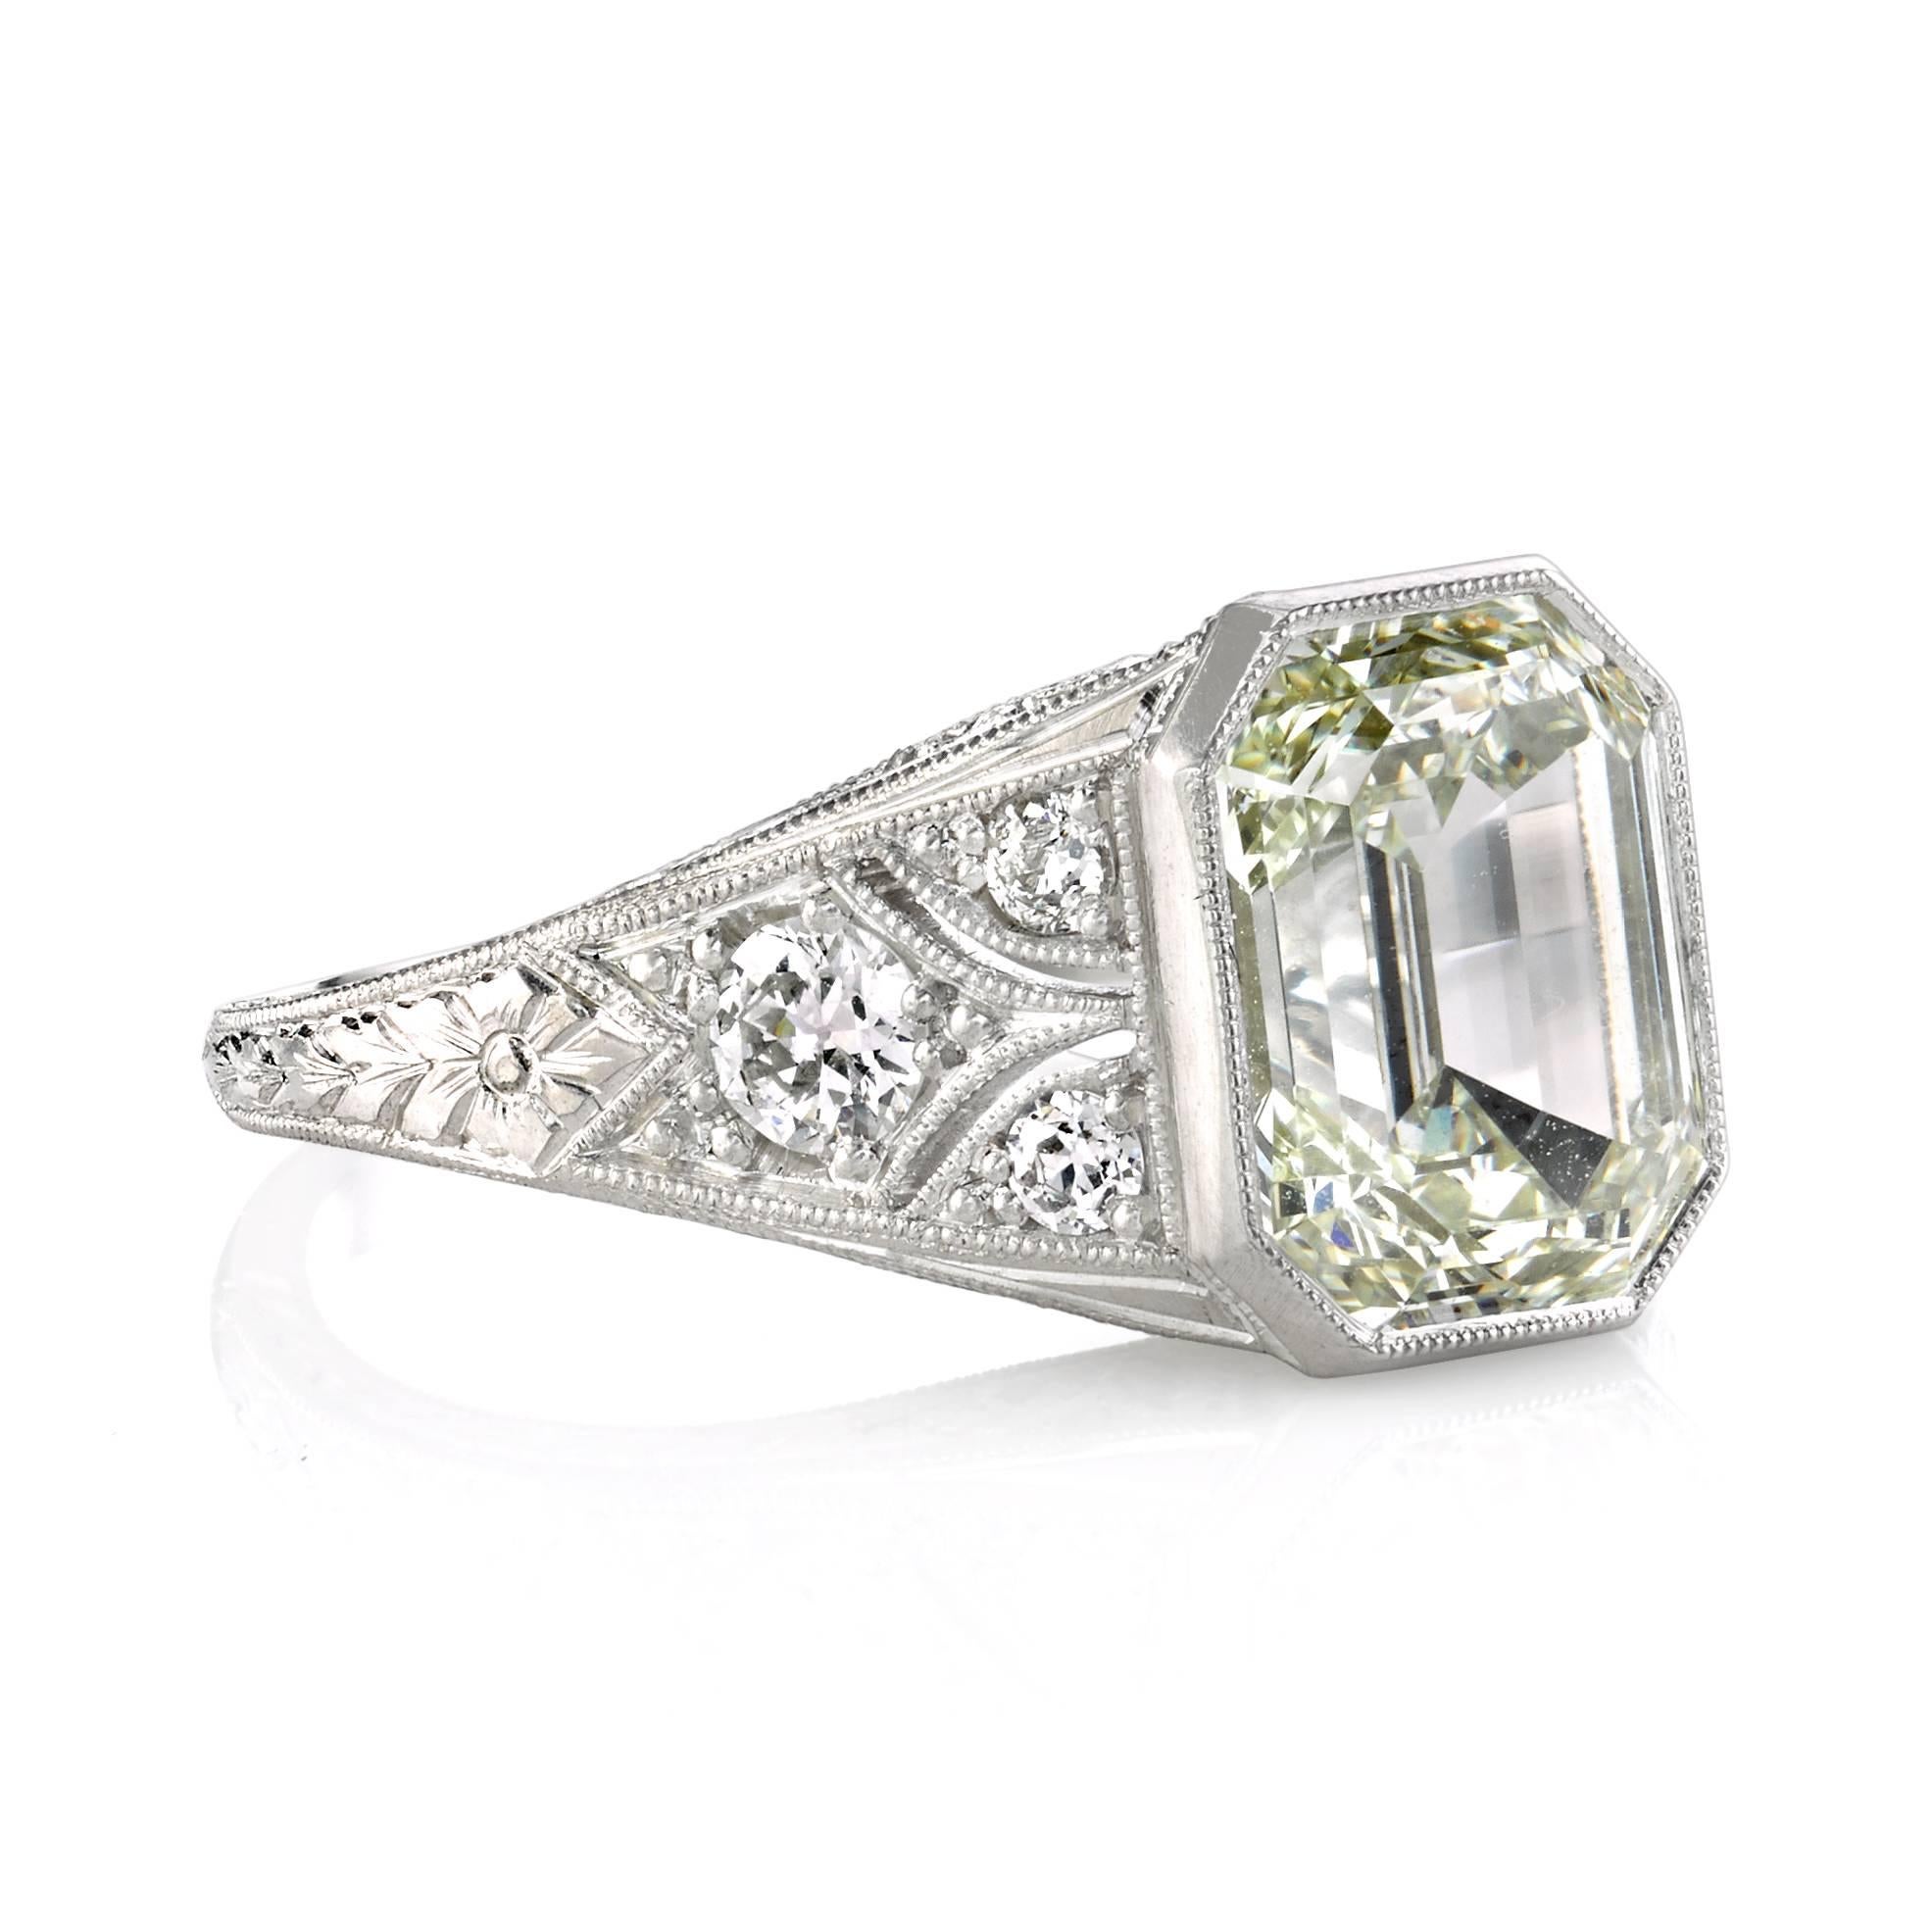 3.06ct M/VS2 HRD certified Emerald cut diamond set in a handcrafted platinum mounting. An Art Deco design featuring a beautiful detailed gallery, low profile, and tapering band.